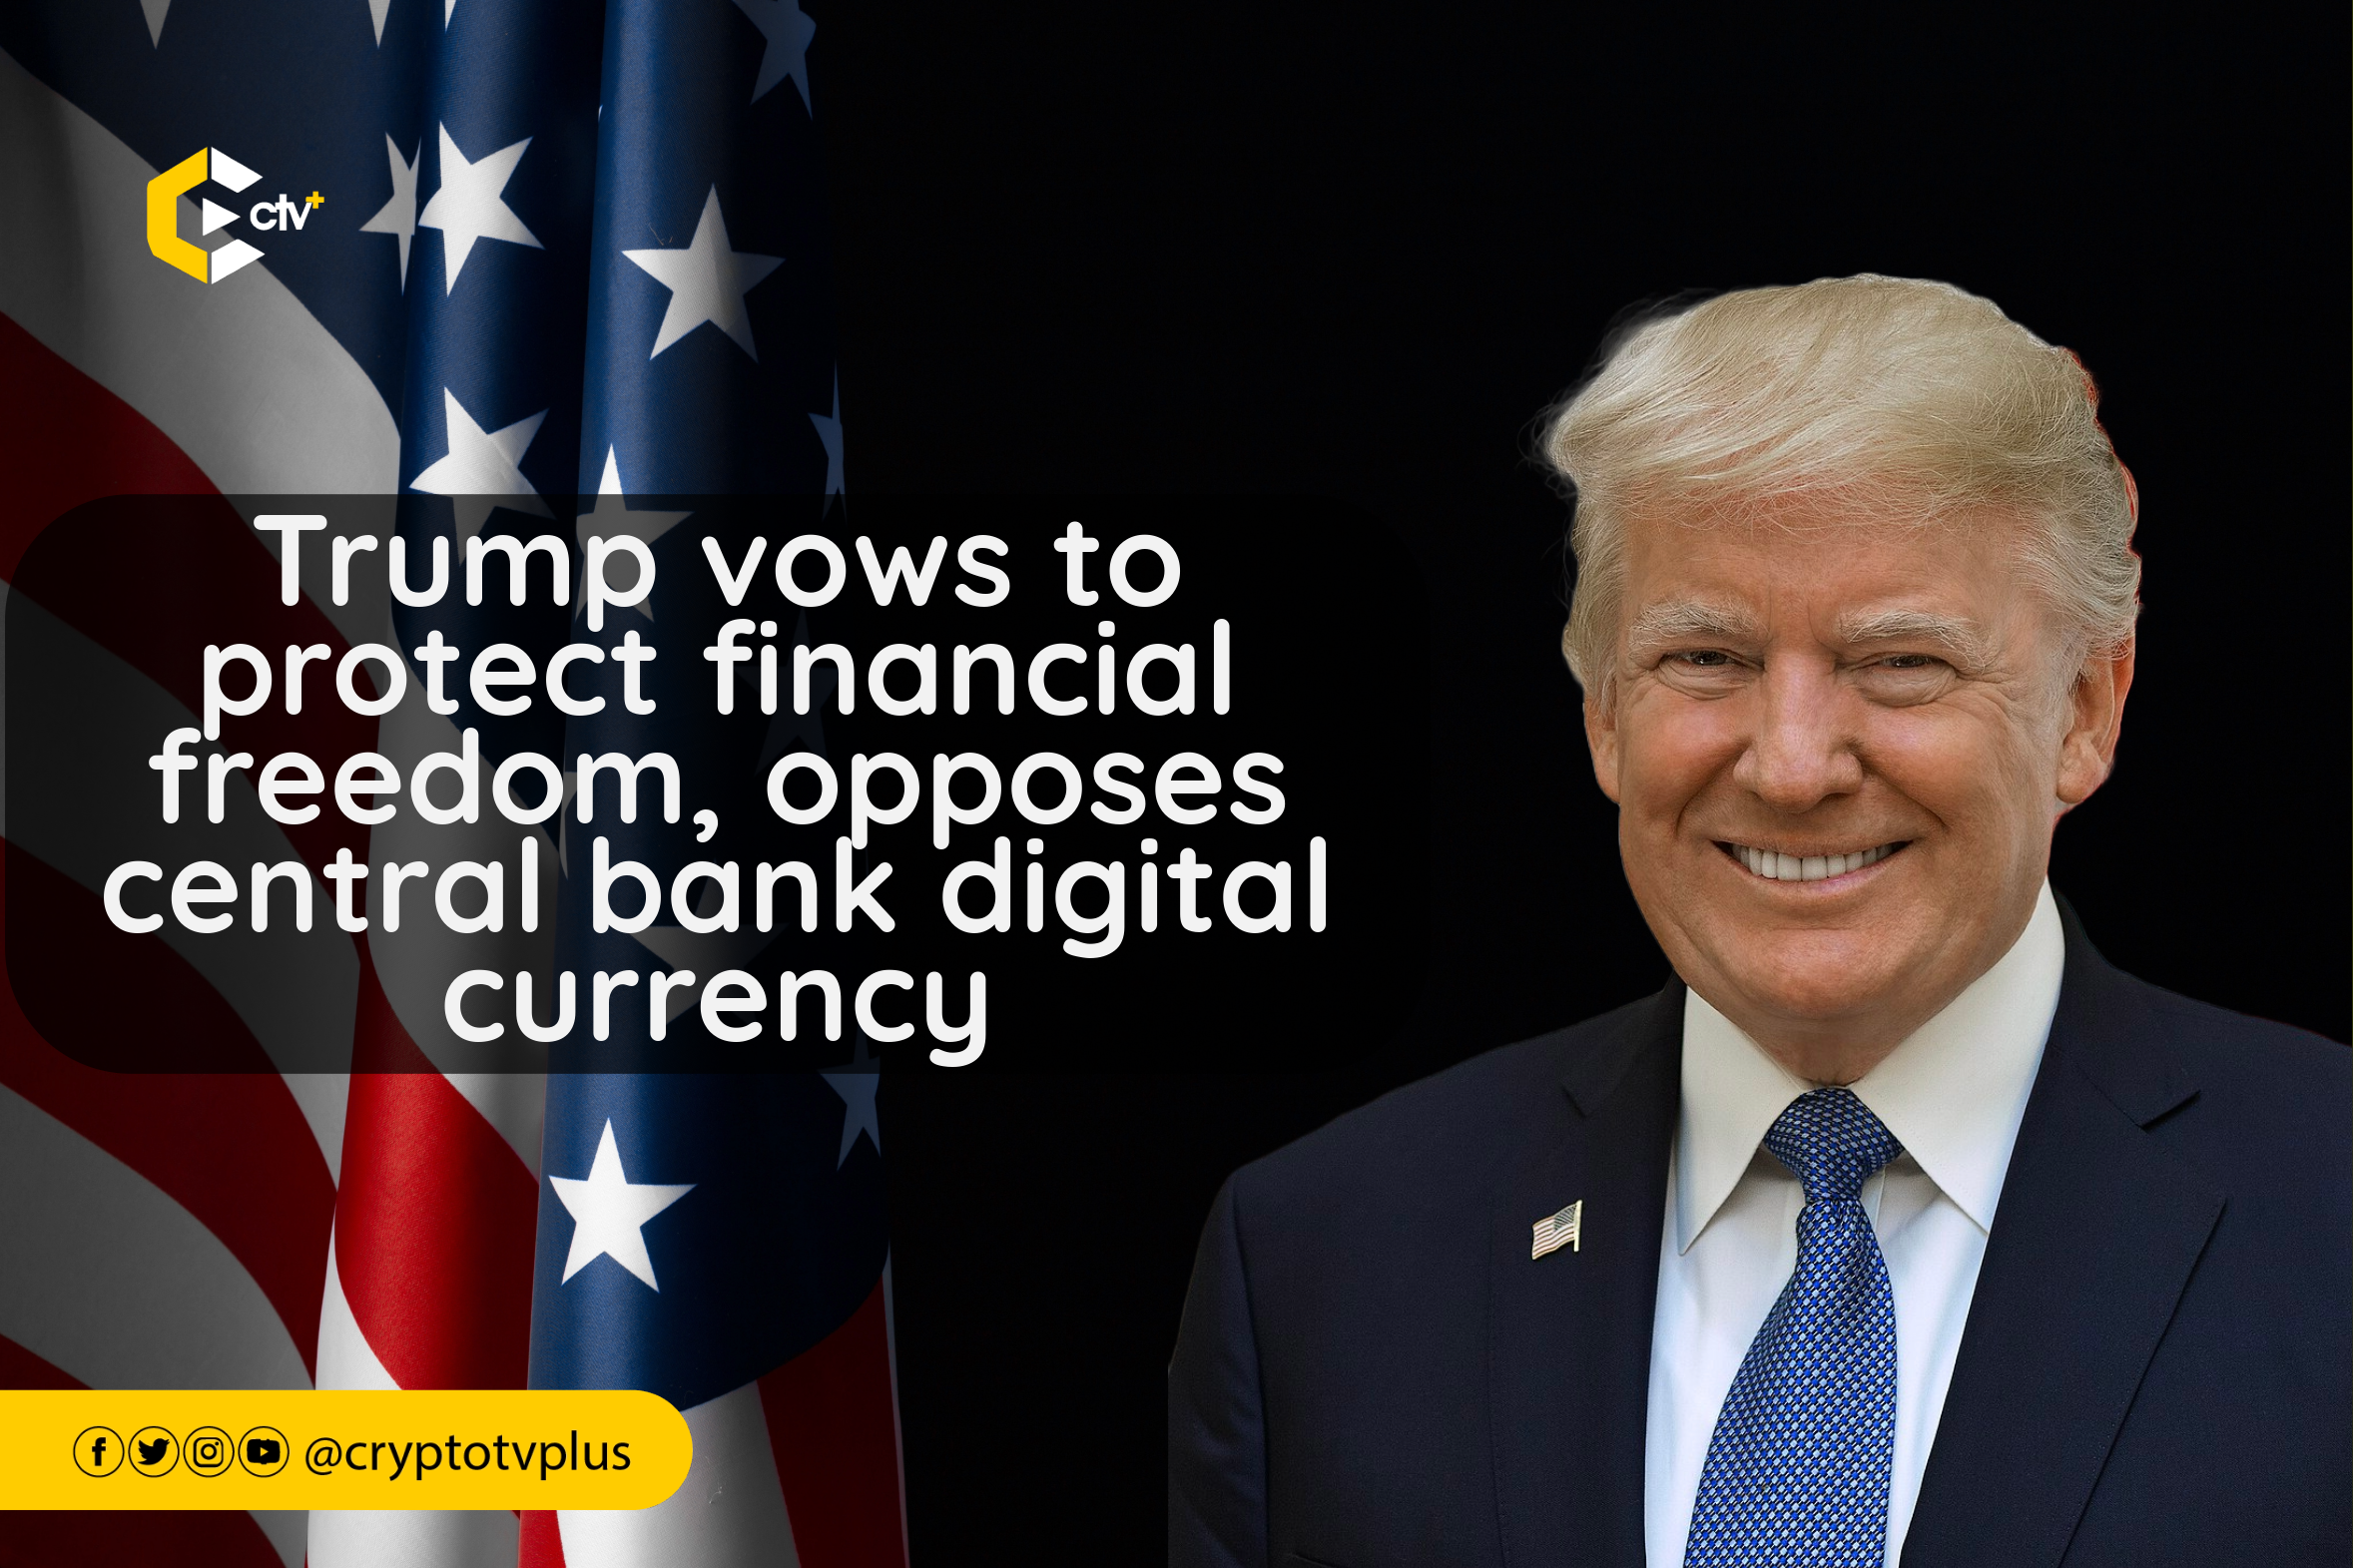 President Trump opposes Central Bank Digital Currency (CBDCs), says it is anti-people, and vows to protect financial freedom.